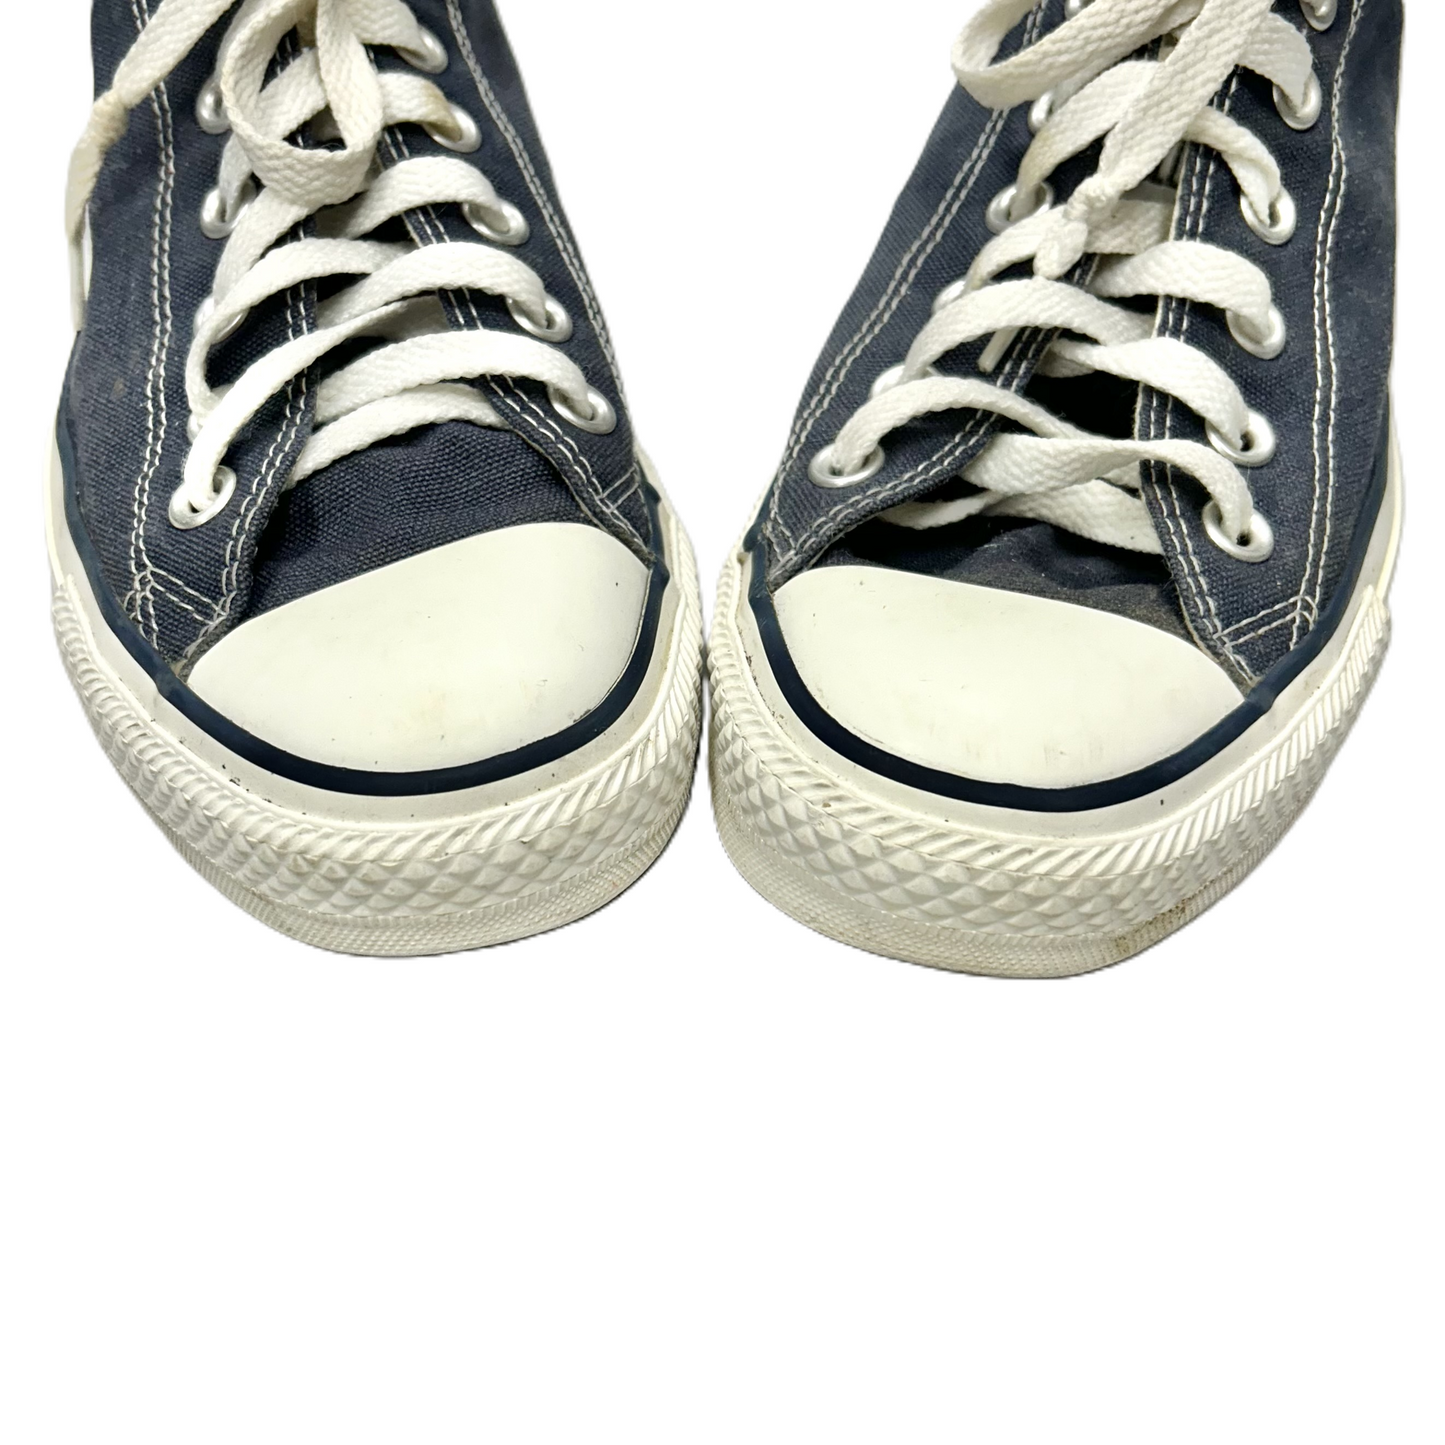 Blue & White Shoes Sneakers By Converse, Size: 8